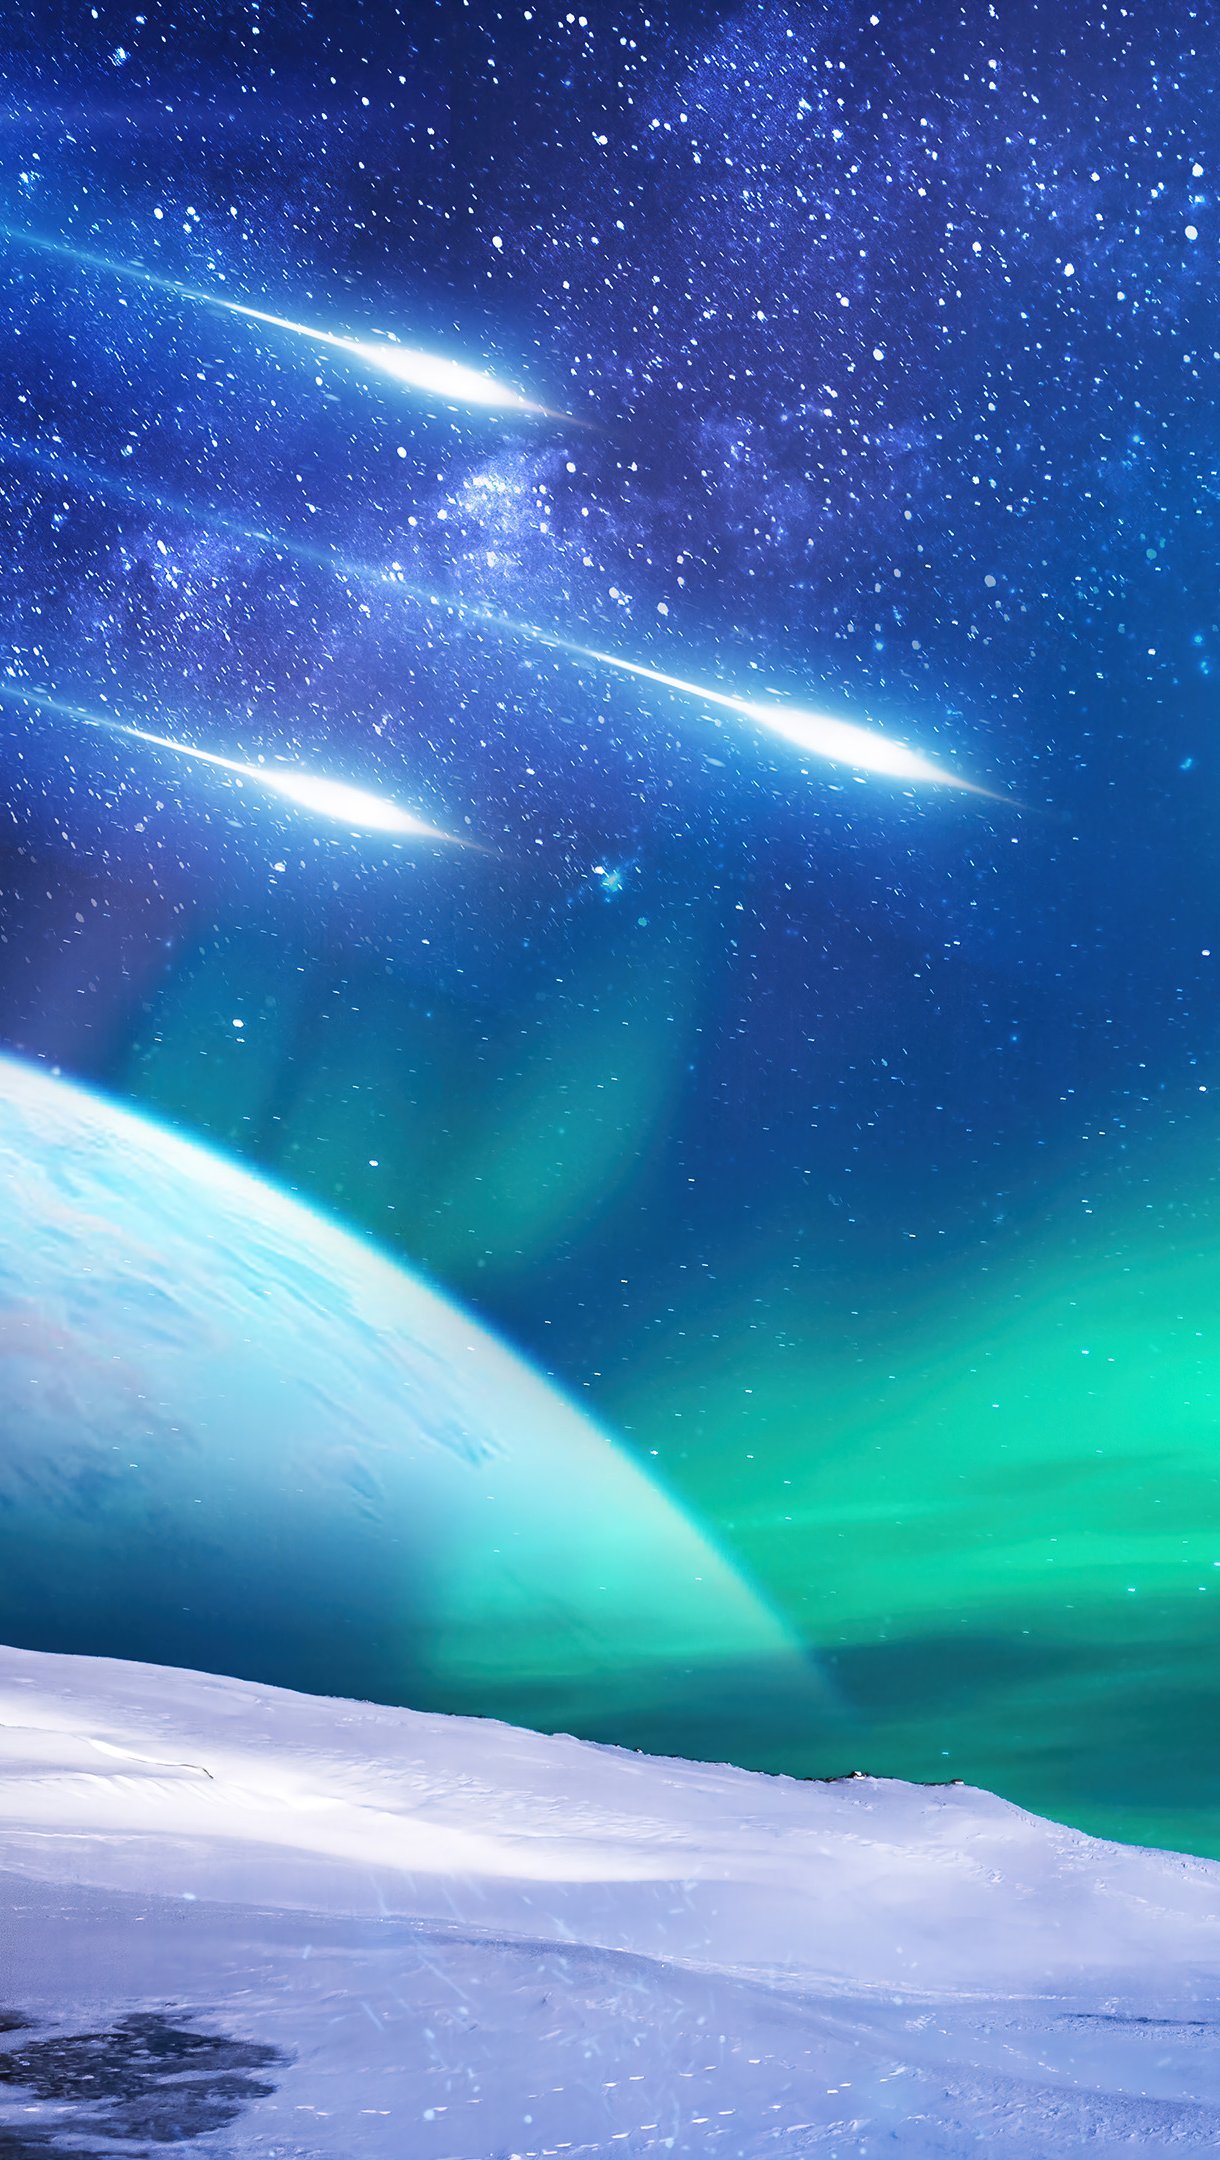 Northern lights with shooting stars and planet in the background Wallpaper 4k Ultra HD